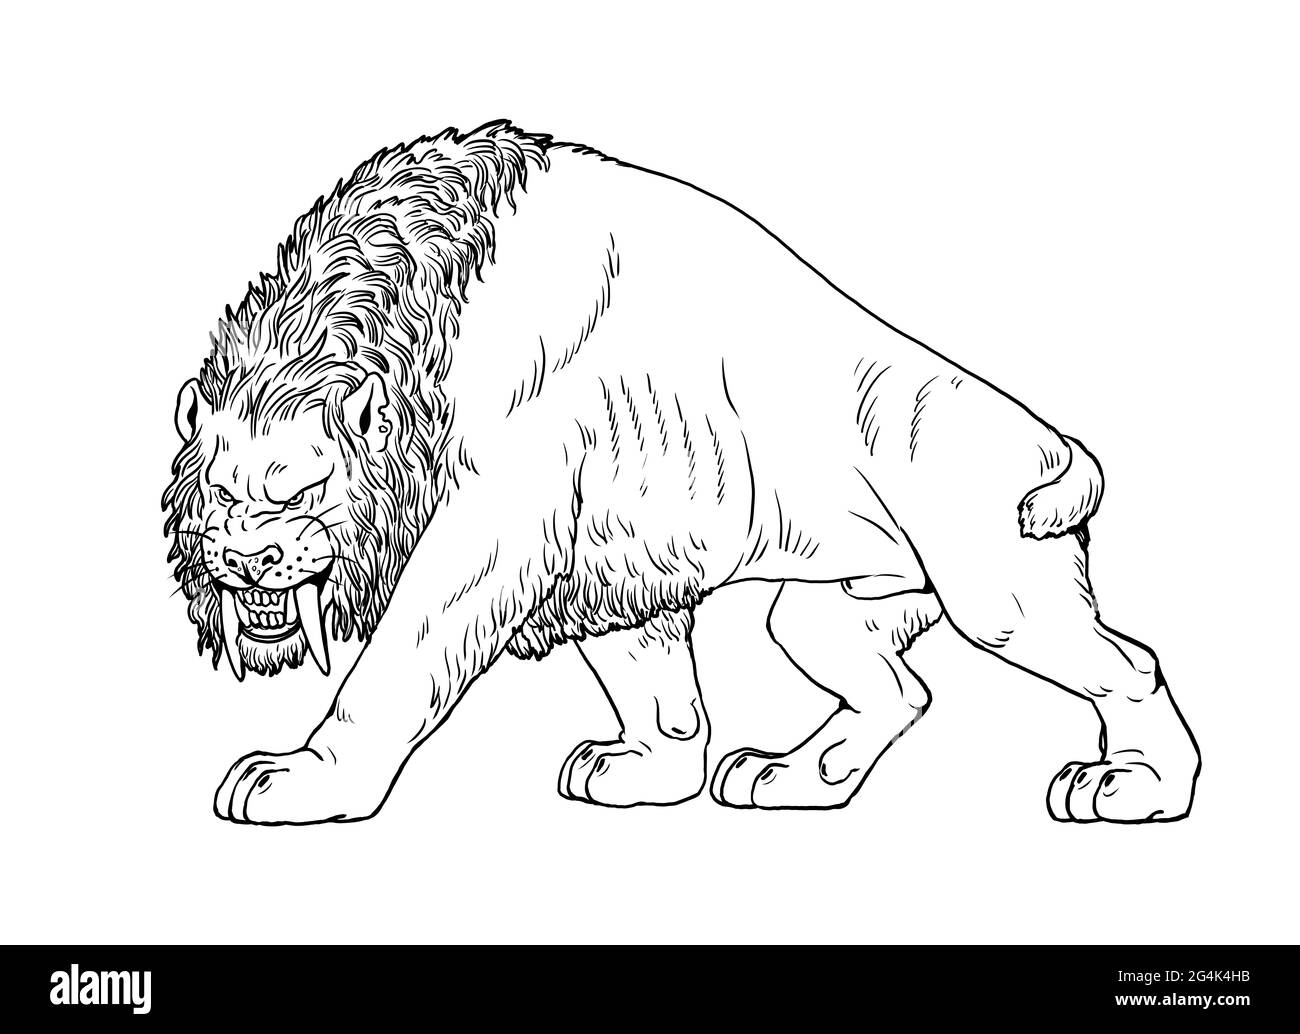 Saber tooth cat on the hunt. Animals illustration. Saber-toothed cat attack. Coloring book. Stock Photo